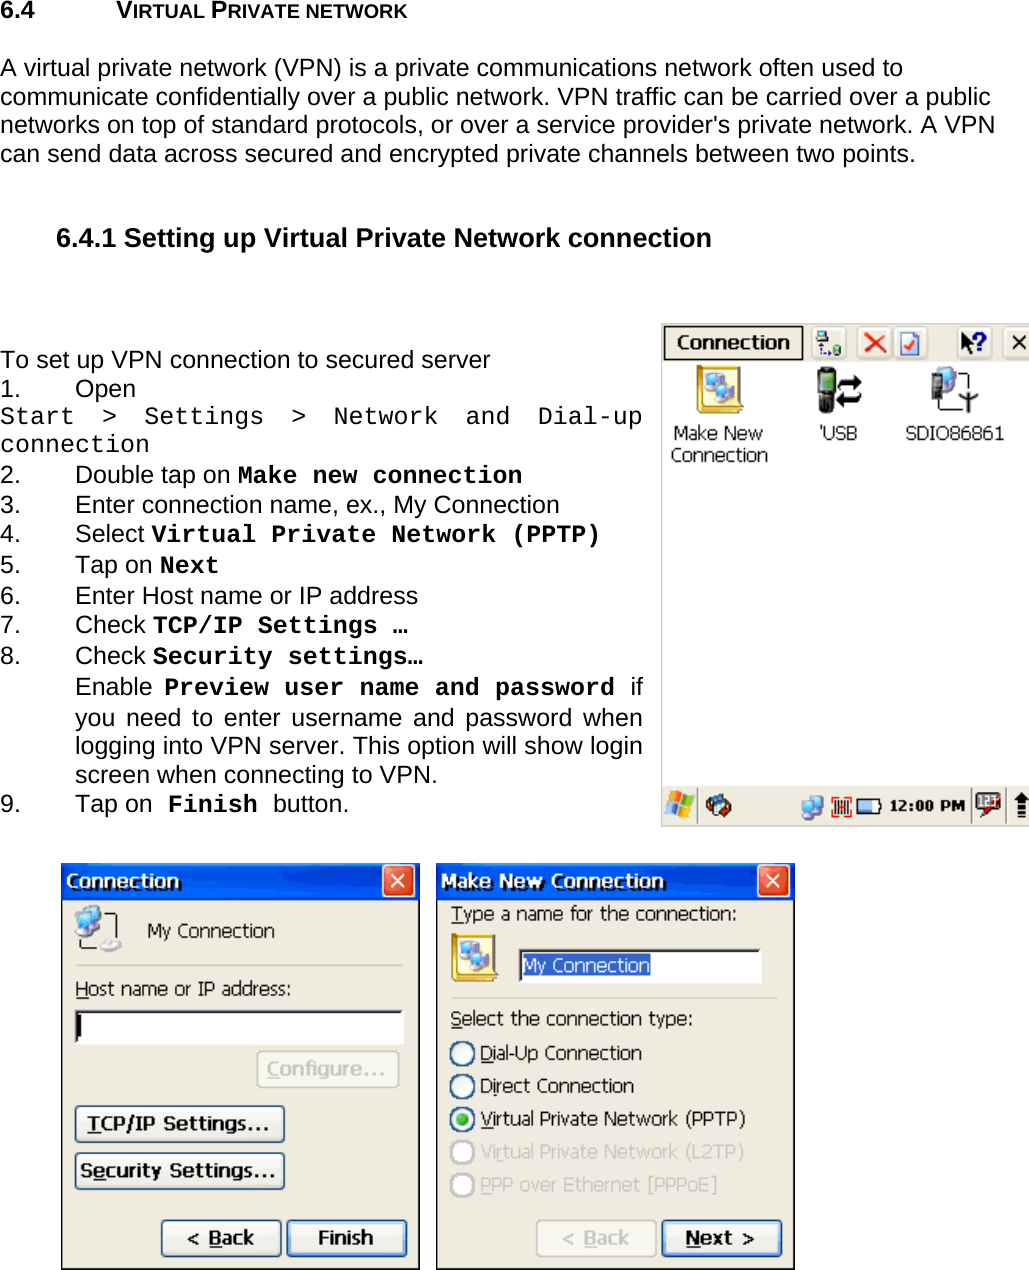 User manual  PM250 © All rights reserved. Pointmobile     67  6.4 VIRTUAL PRIVATE NETWORK  A virtual private network (VPN) is a private communications network often used to communicate confidentially over a public network. VPN traffic can be carried over a public networks on top of standard protocols, or over a service provider&apos;s private network. A VPN can send data across secured and encrypted private channels between two points.  6.4.1 Setting up Virtual Private Network connection    To set up VPN connection to secured server 1. Open  Start &gt; Settings &gt; Network and Dial-up connection 2.  Double tap on Make new connection 3.  Enter connection name, ex., My Connection 4. Select Virtual Private Network (PPTP) 5. Tap on Next 6.  Enter Host name or IP address 7. Check TCP/IP Settings …  8. Check Security settings… Enable  Preview user name and password if you need to enter username and password when logging into VPN server. This option will show login screen when connecting to VPN. 9. Tap on Finish button.      